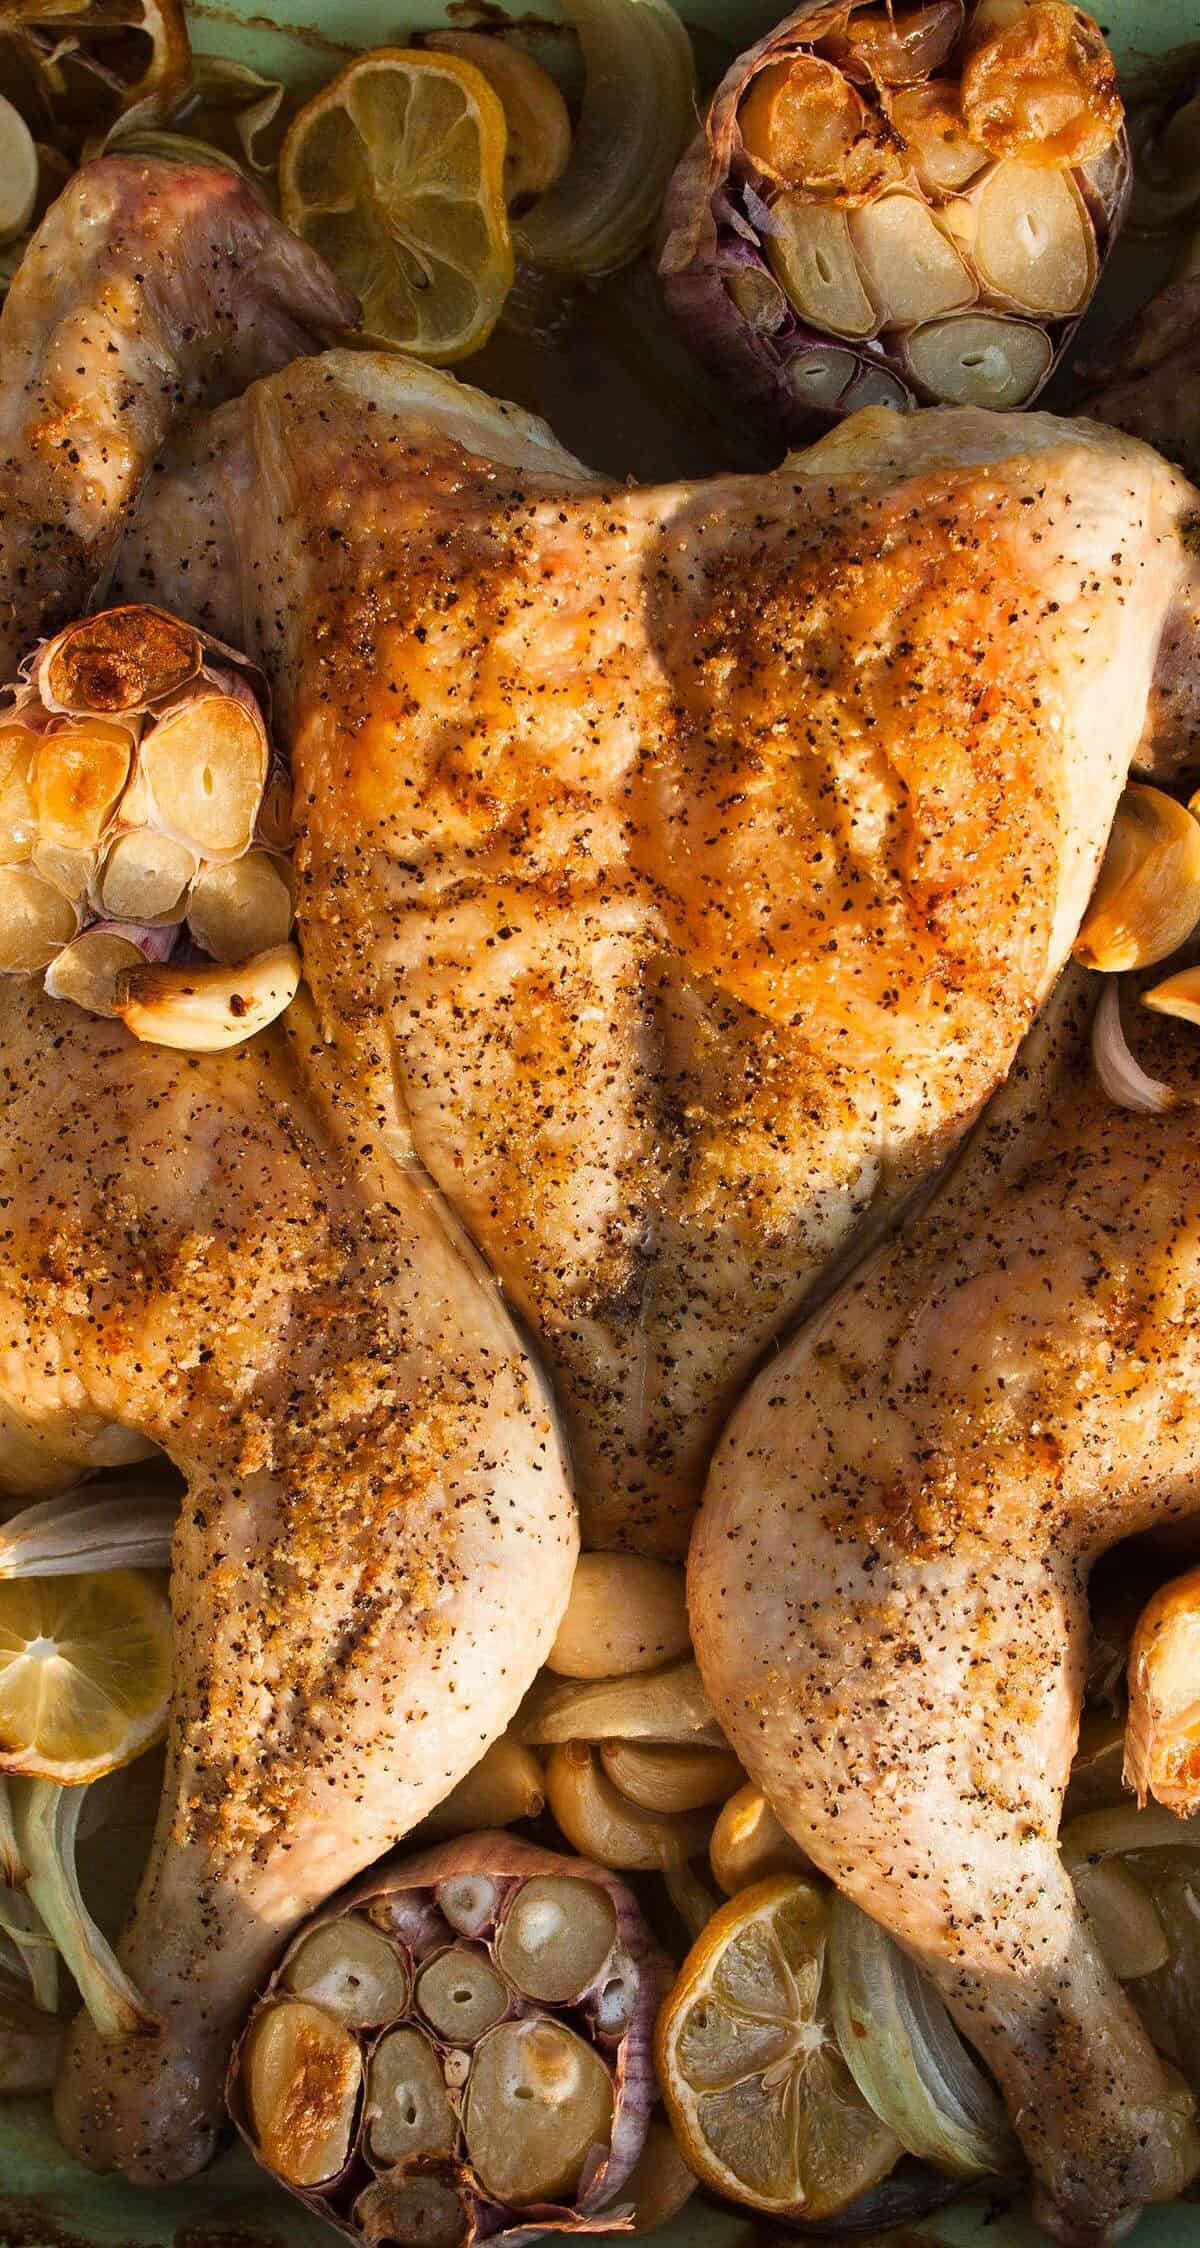  This golden roasted chicken is crispy on the outside and tender on the inside.